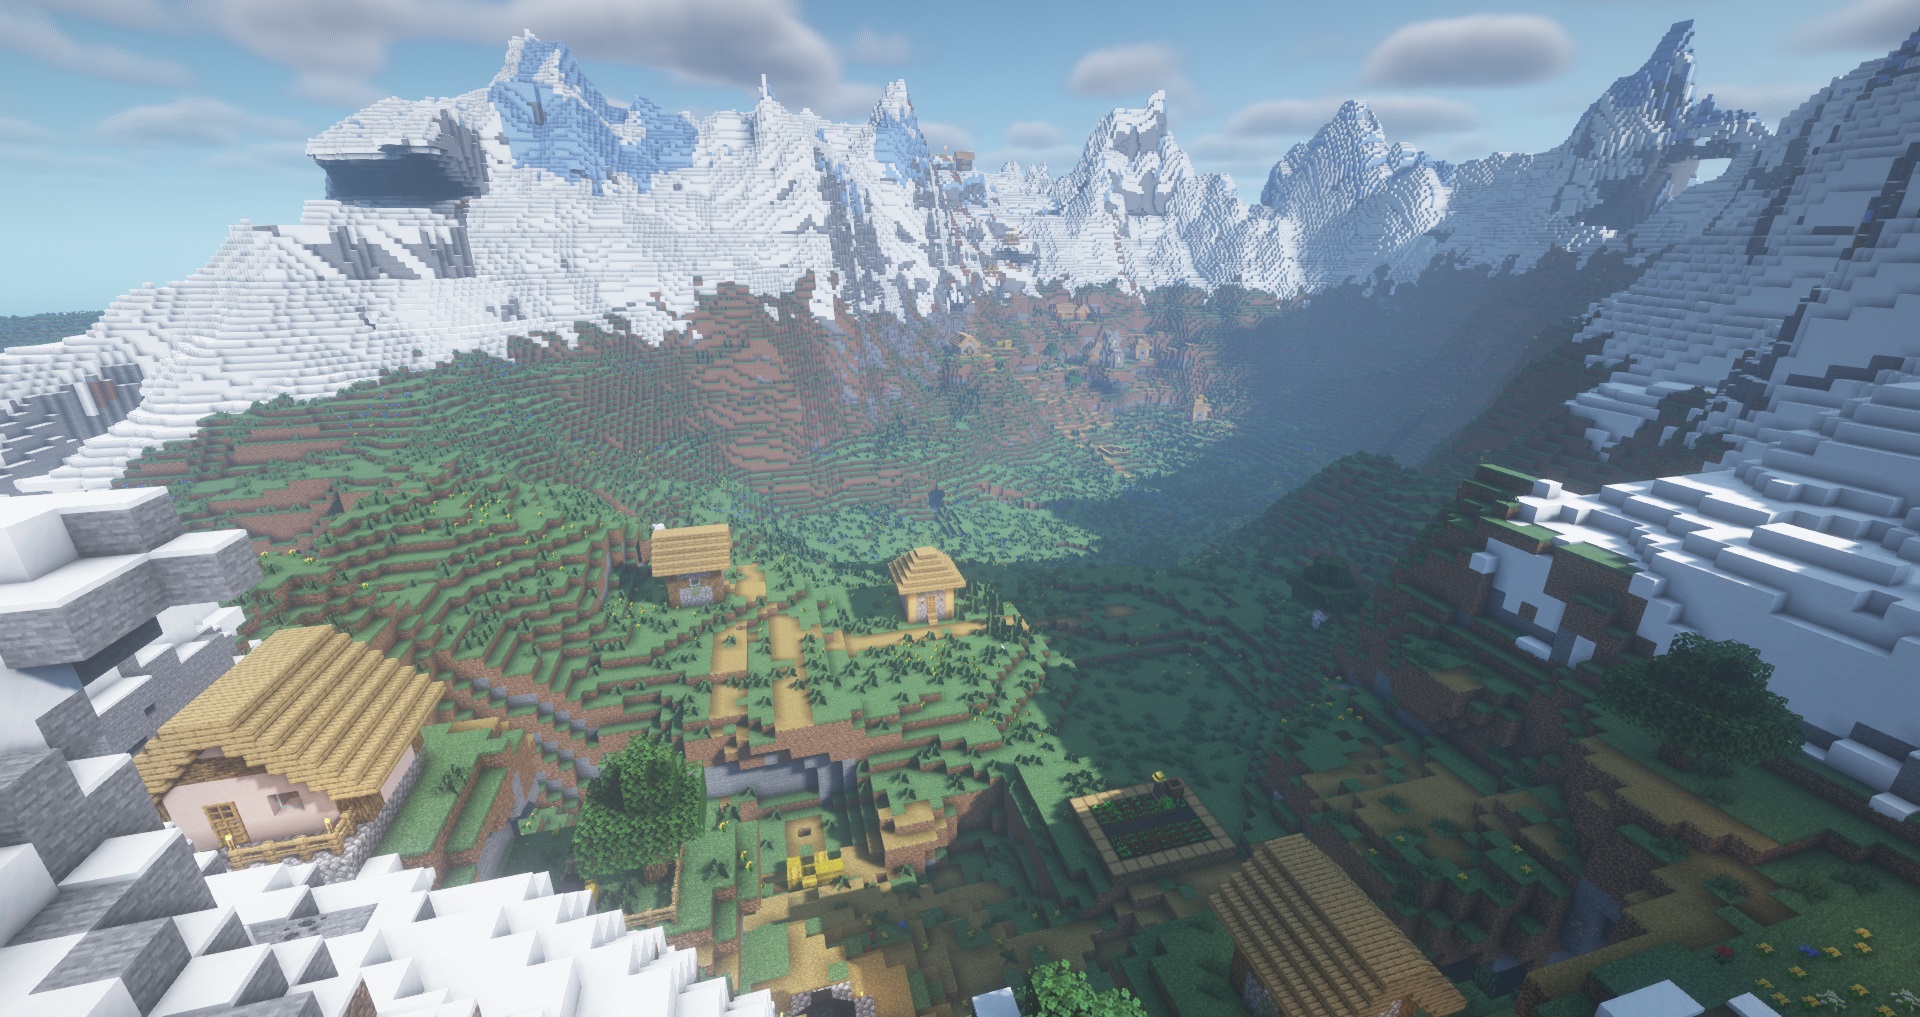 Minecraft screenshot with shaders showing a valley surrounded by snowy and icy mountains and two villages in the plains in between